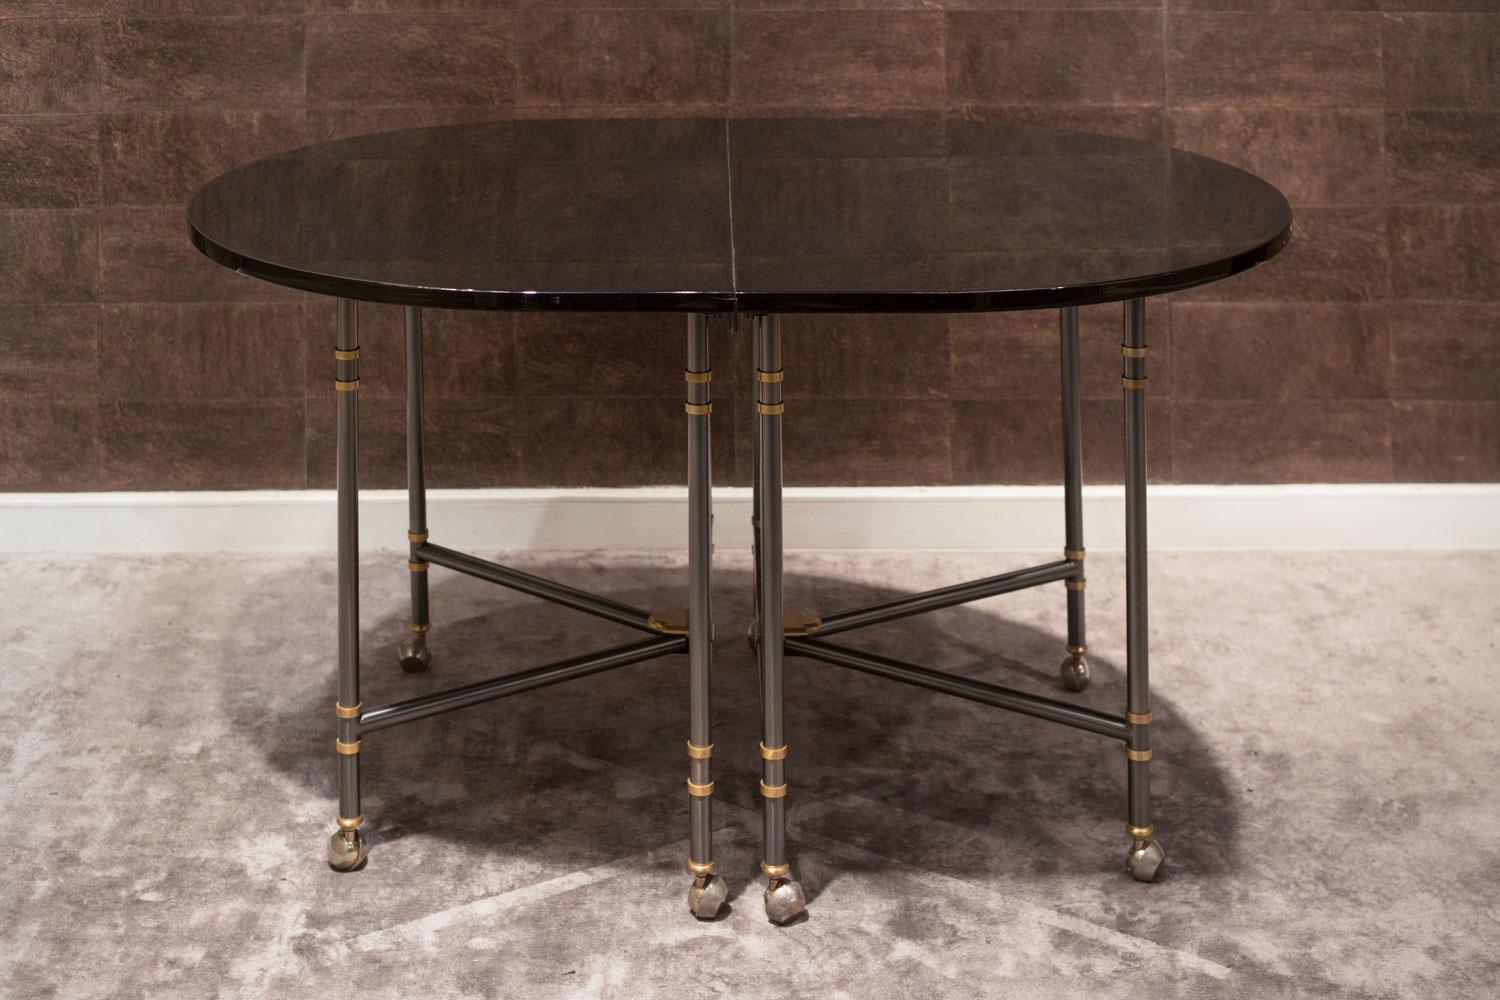 Extension oval dining table, Royale model, iconic piece from Maison Jansen France, 1960

Table with top and extension in black lacquer and details in gilded bronze and gunmetal gray metal.

Designed and made for the French actress Jacqueline